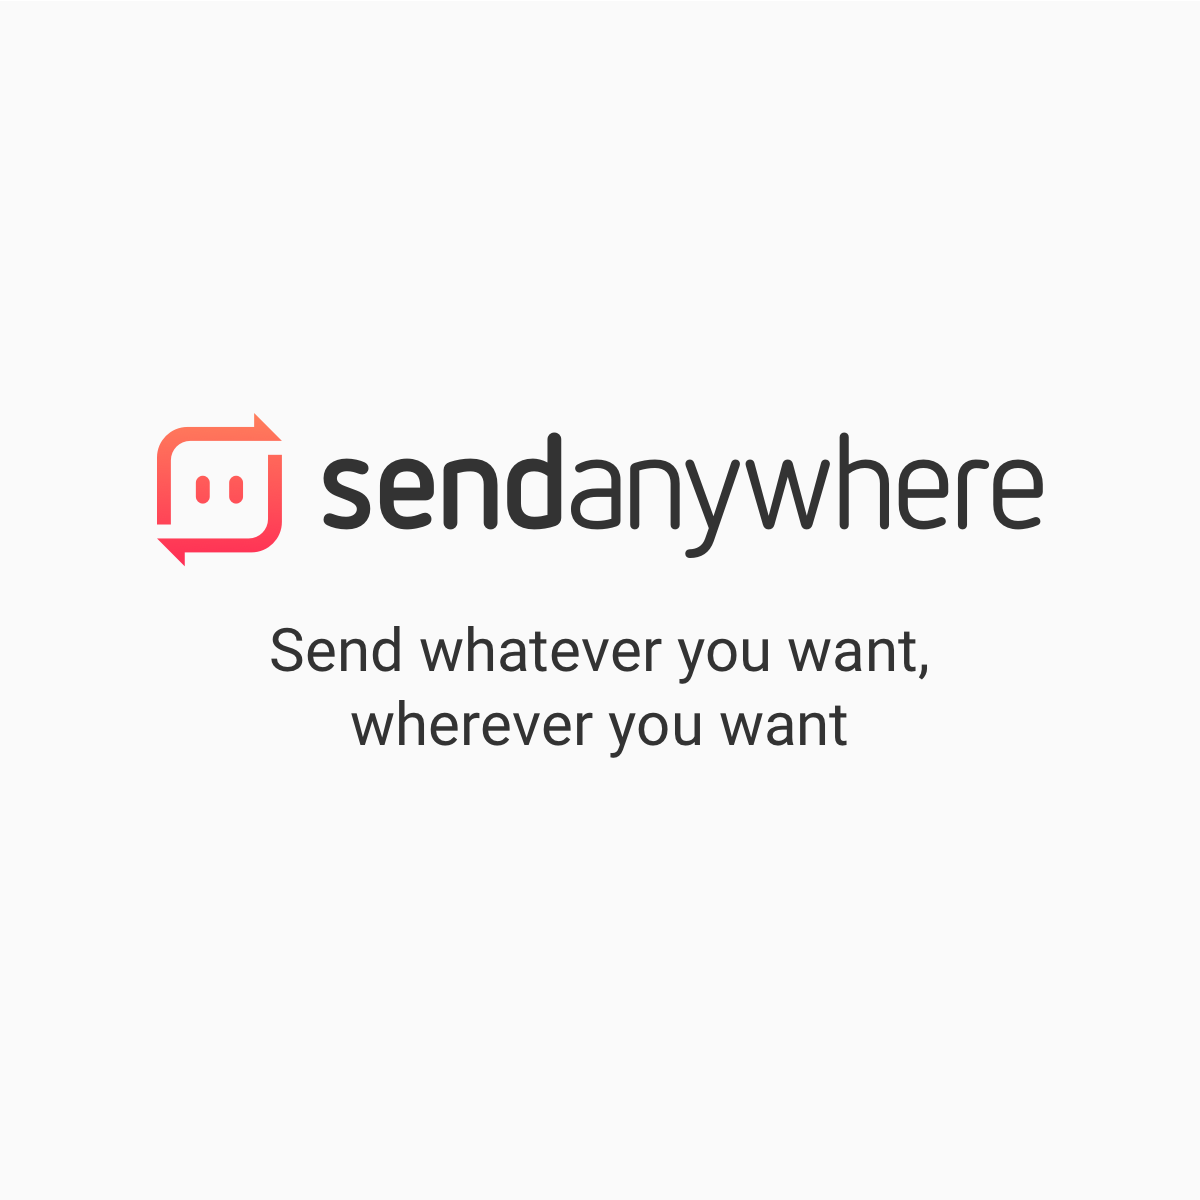 Send everywhere sure cuts alot download free